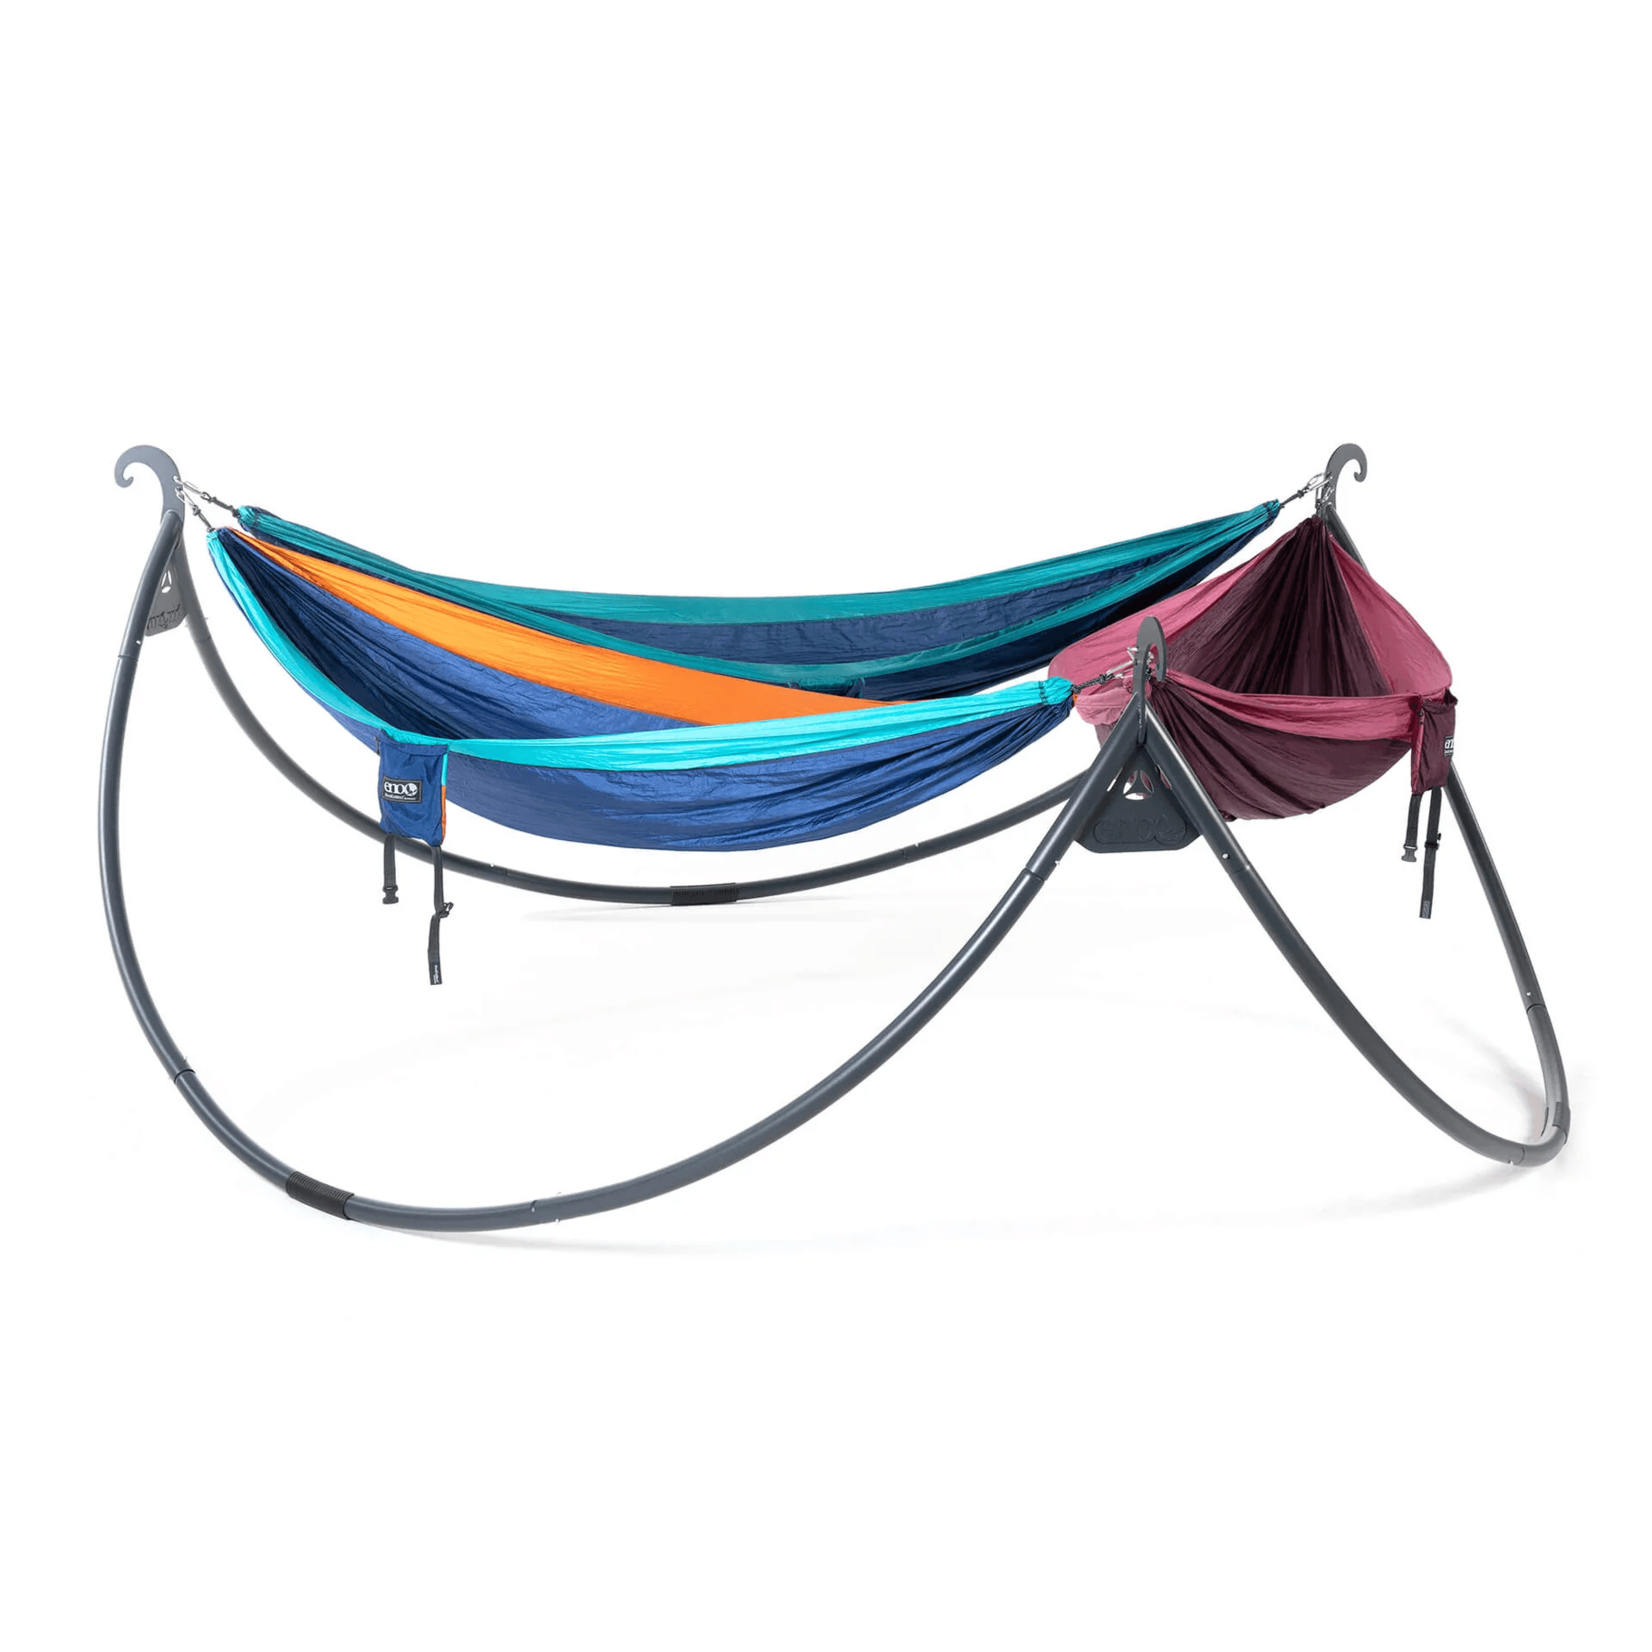 Eagles Nest Outfitters ENOPod Triple Hammock Stand Charcoal